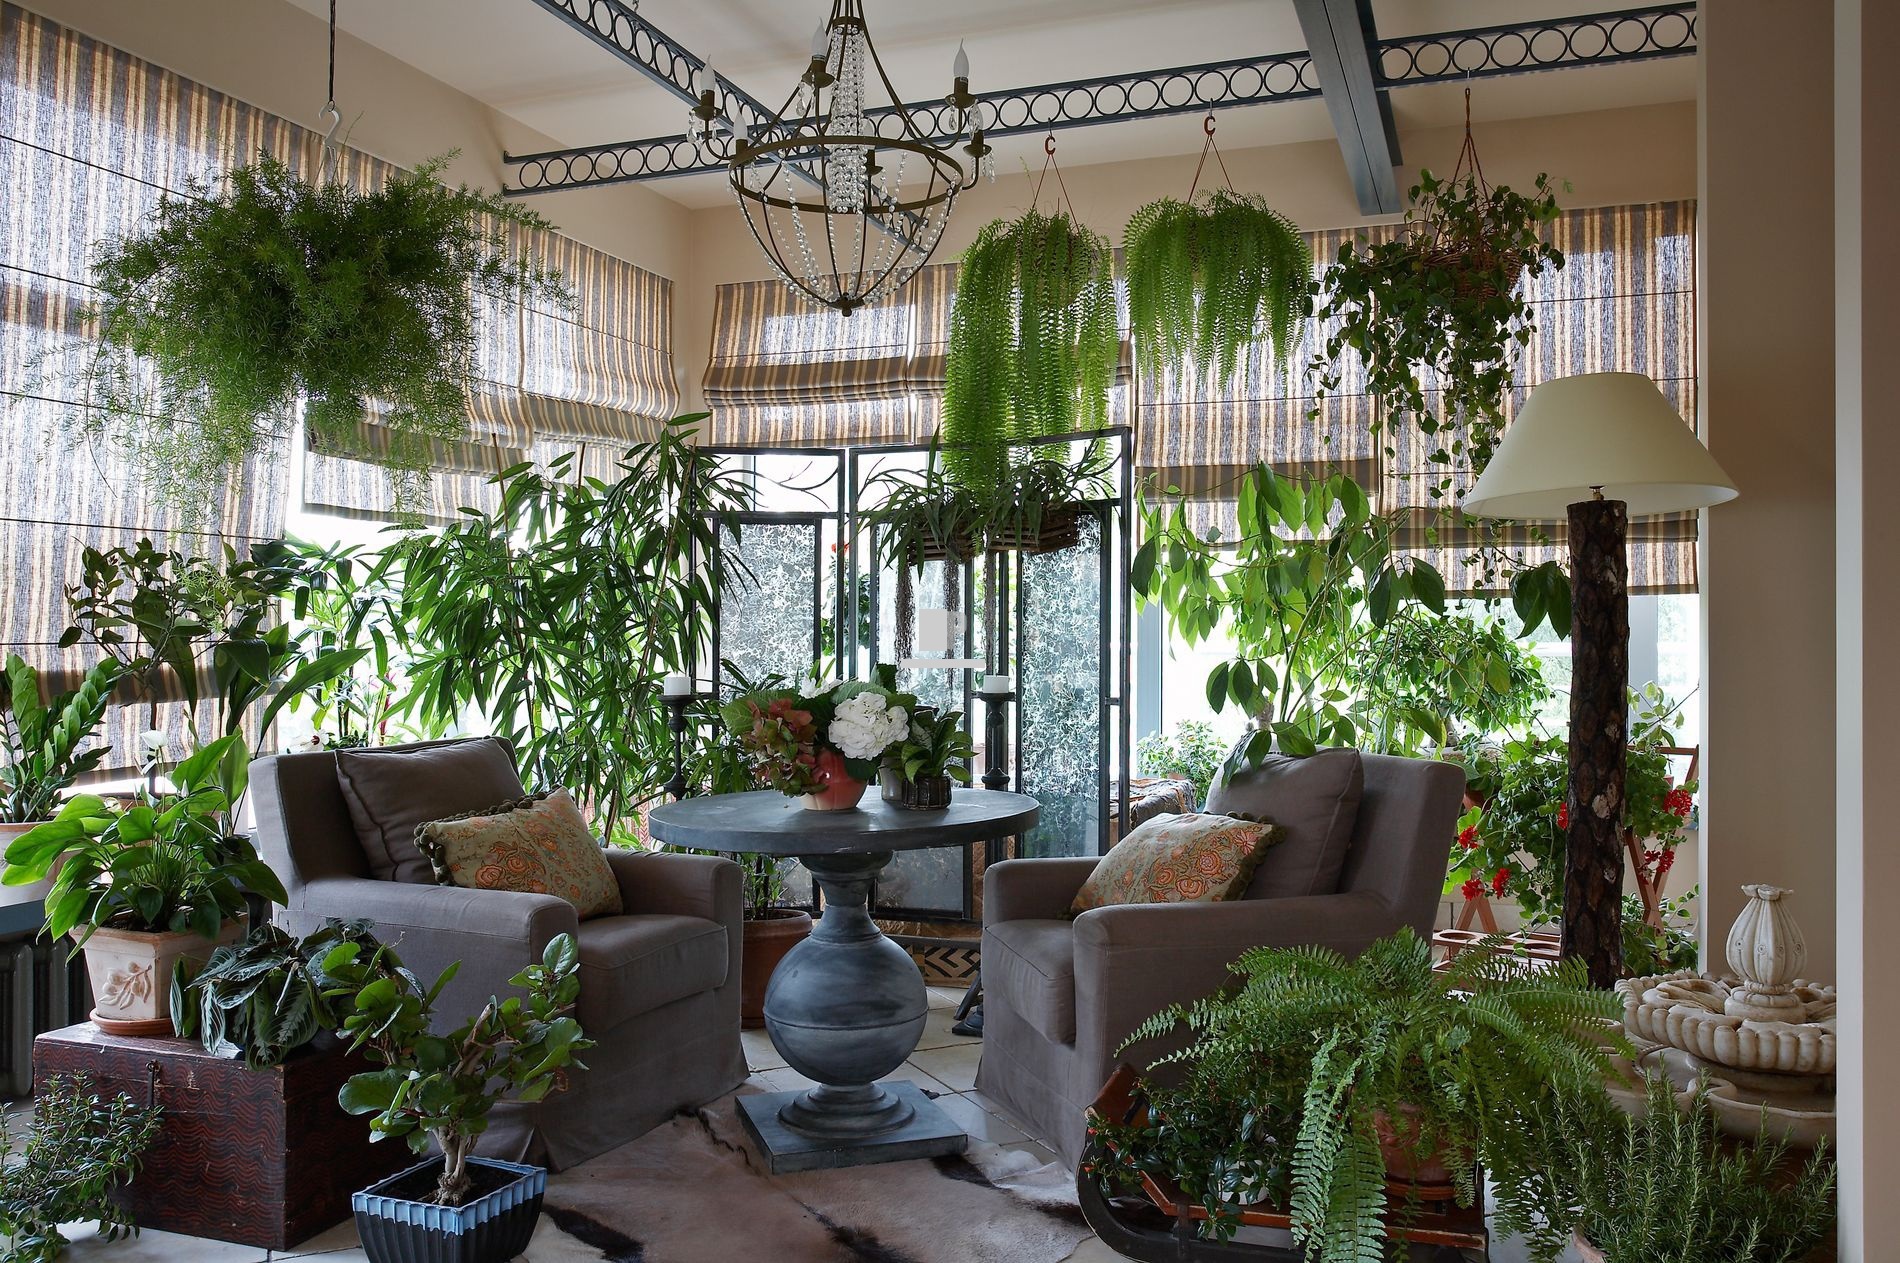 An example of using unusual ideas for decorating a winter garden